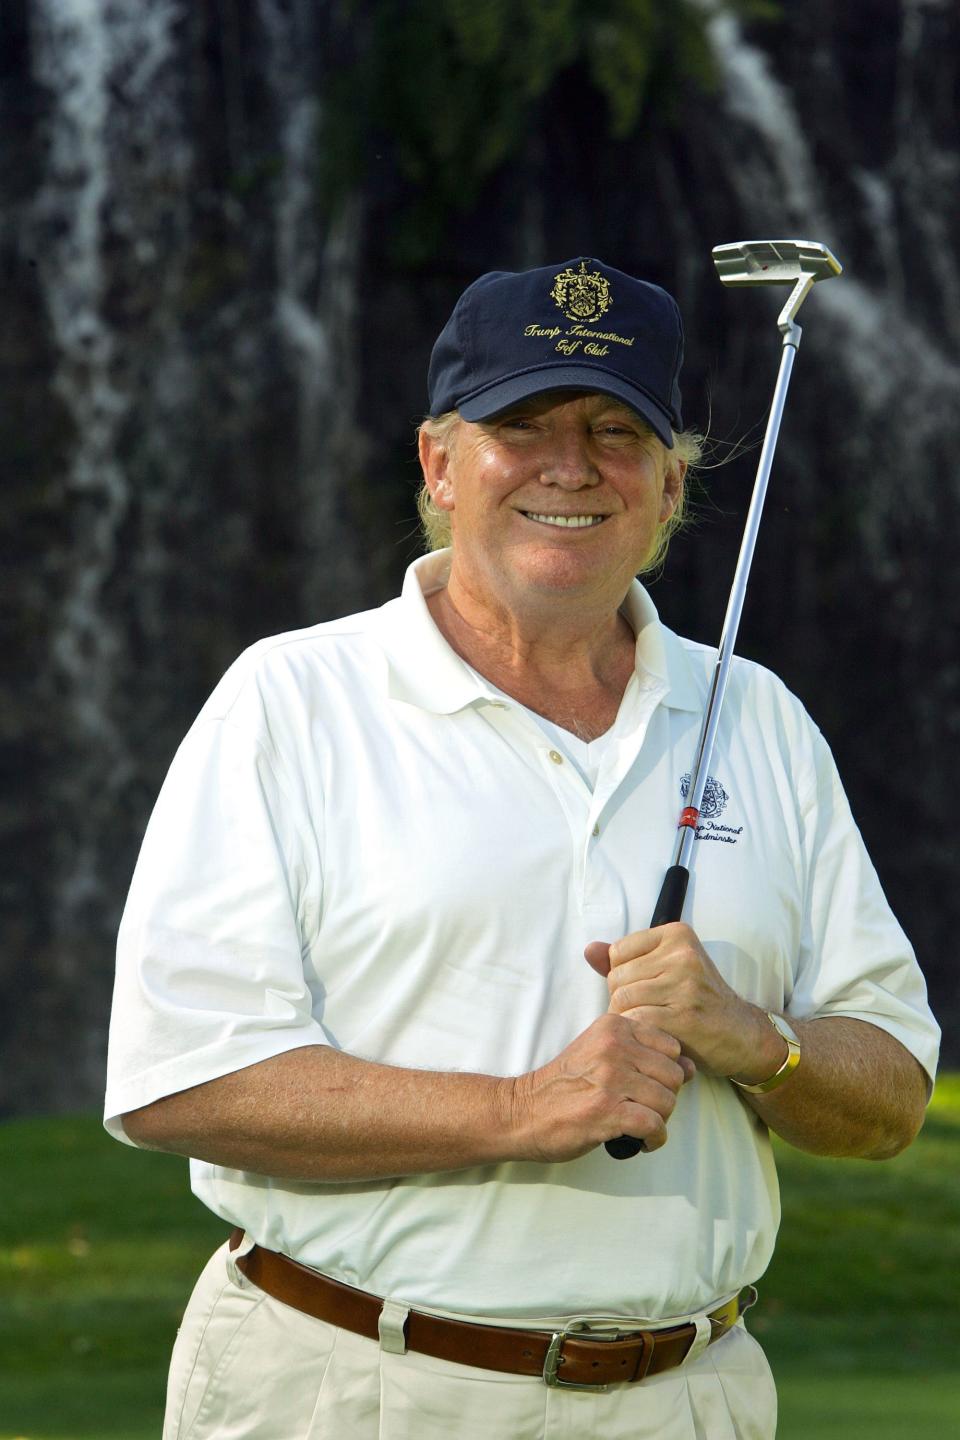 File photo/The Journal News
In Albany, the furor over Trump?s Briarcliff Manor assessment gambit has sparked inquiry into how New York golf courses are valued.
Donald J. Trump at Trump National Golf Club in Briarcliff Manor Sept. 25, 2010.